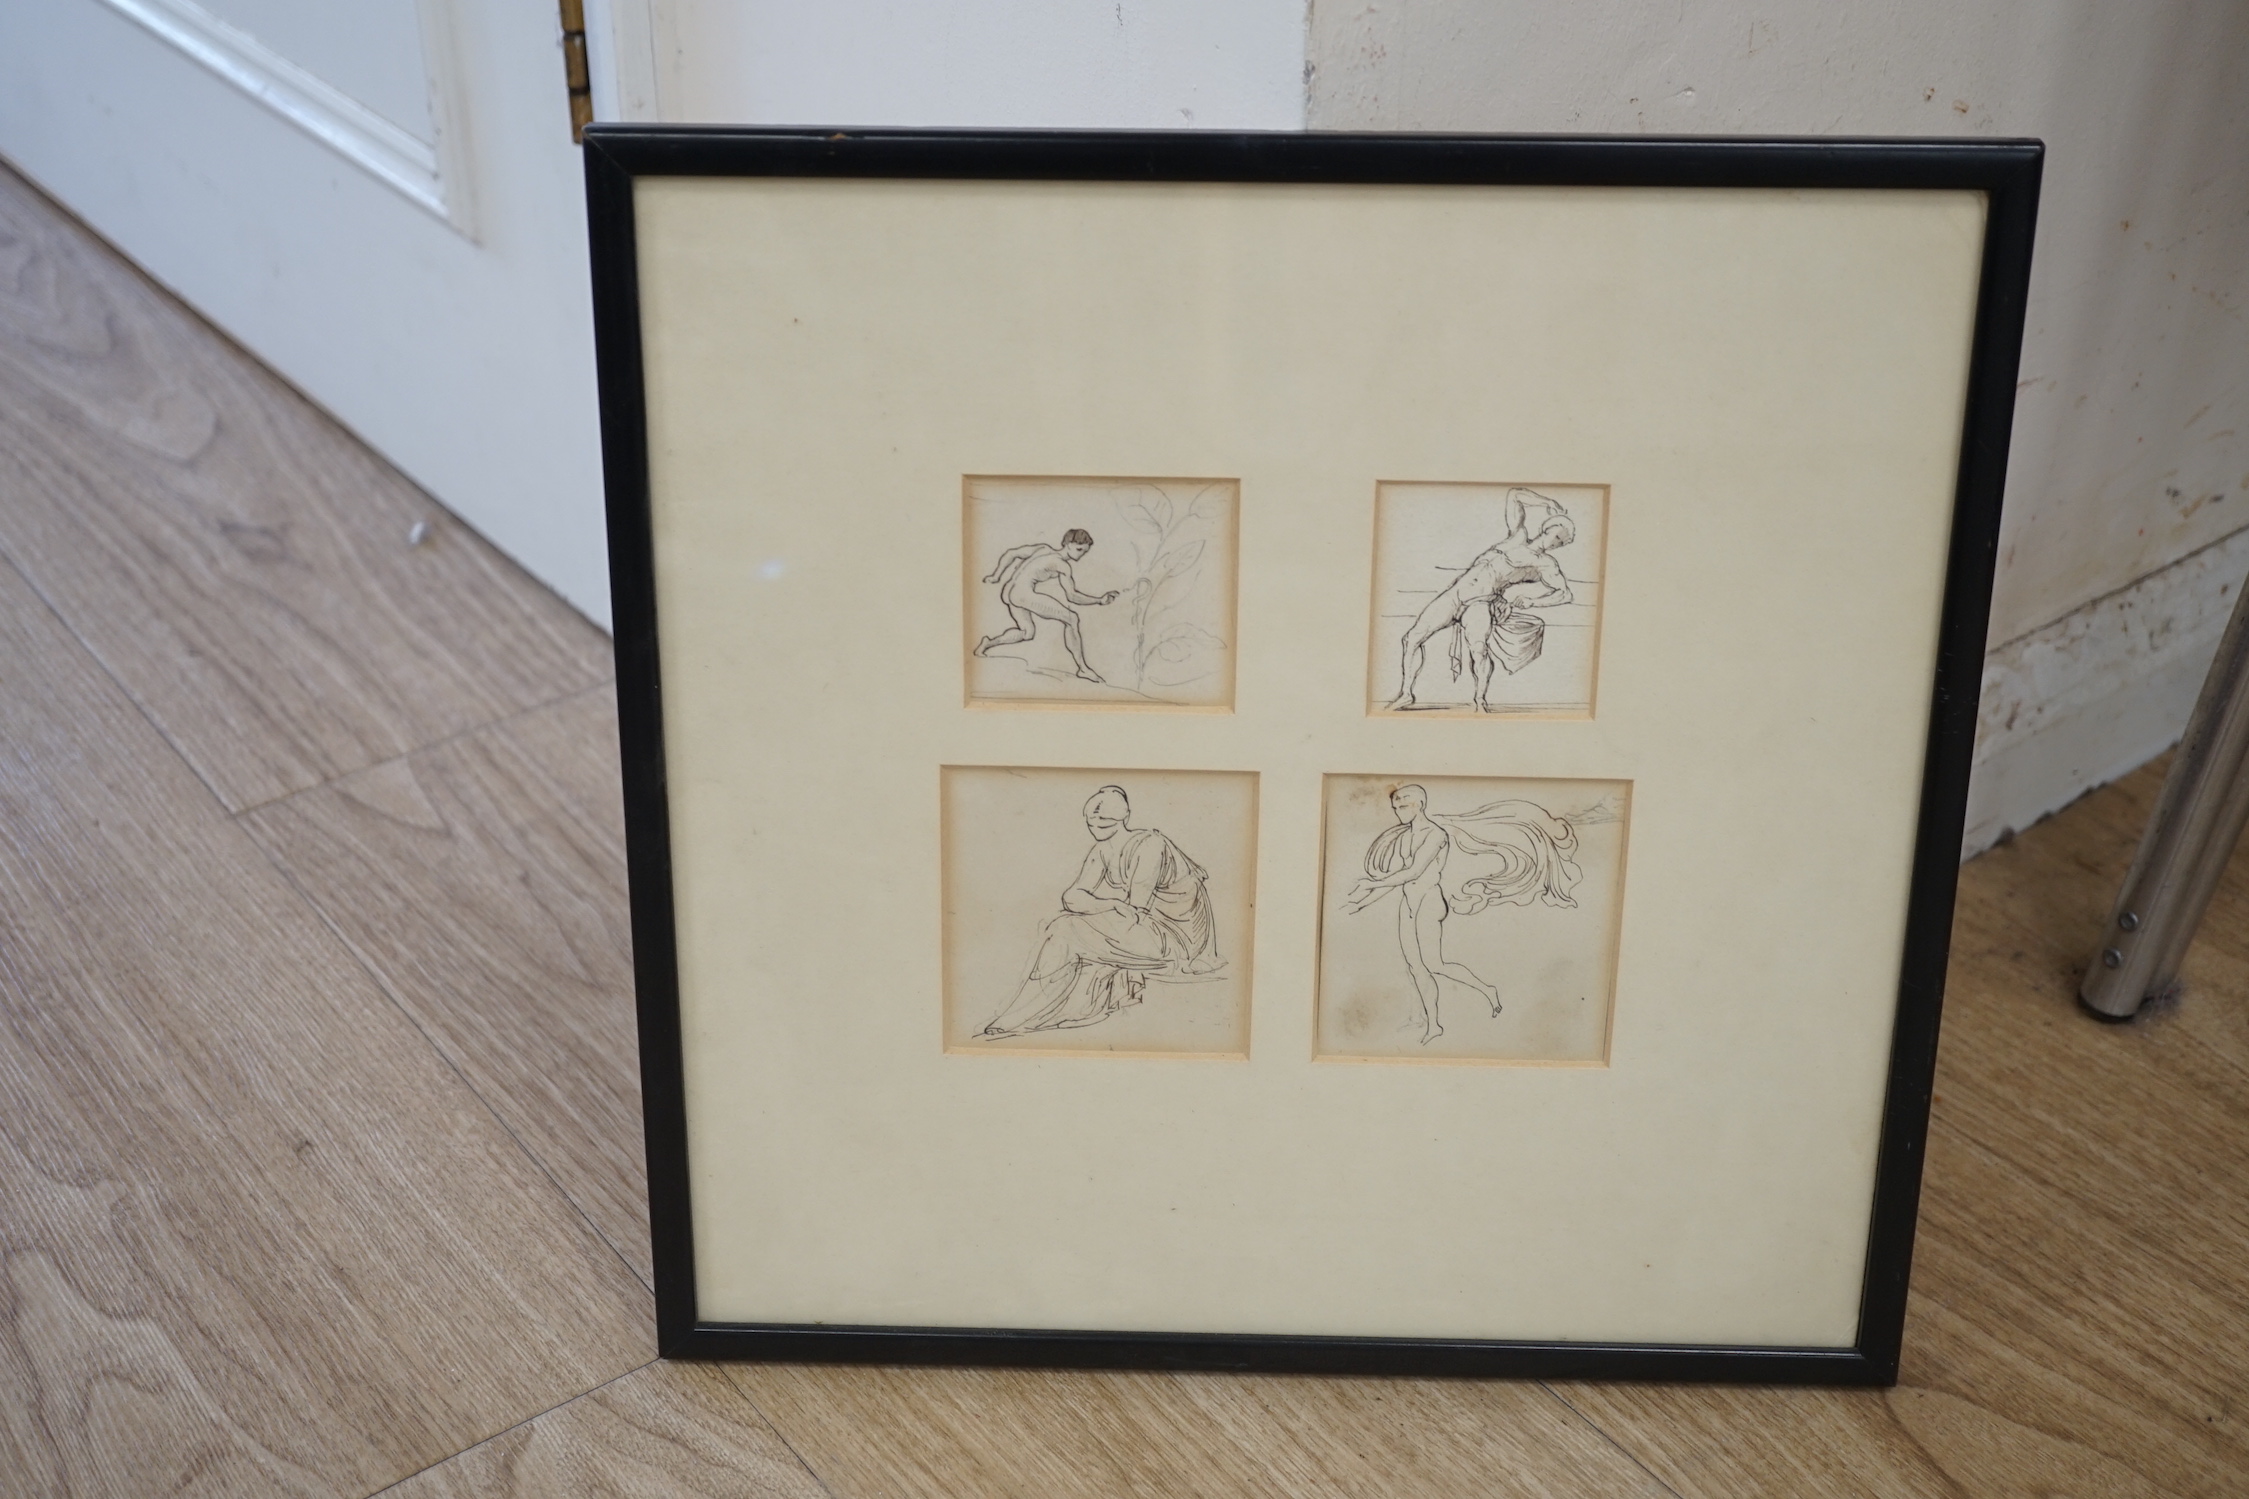 Attributed to William De Morgan (1839-1917), four pen and ink sketches of classical figures, largest 8 x 8cm, framed as one